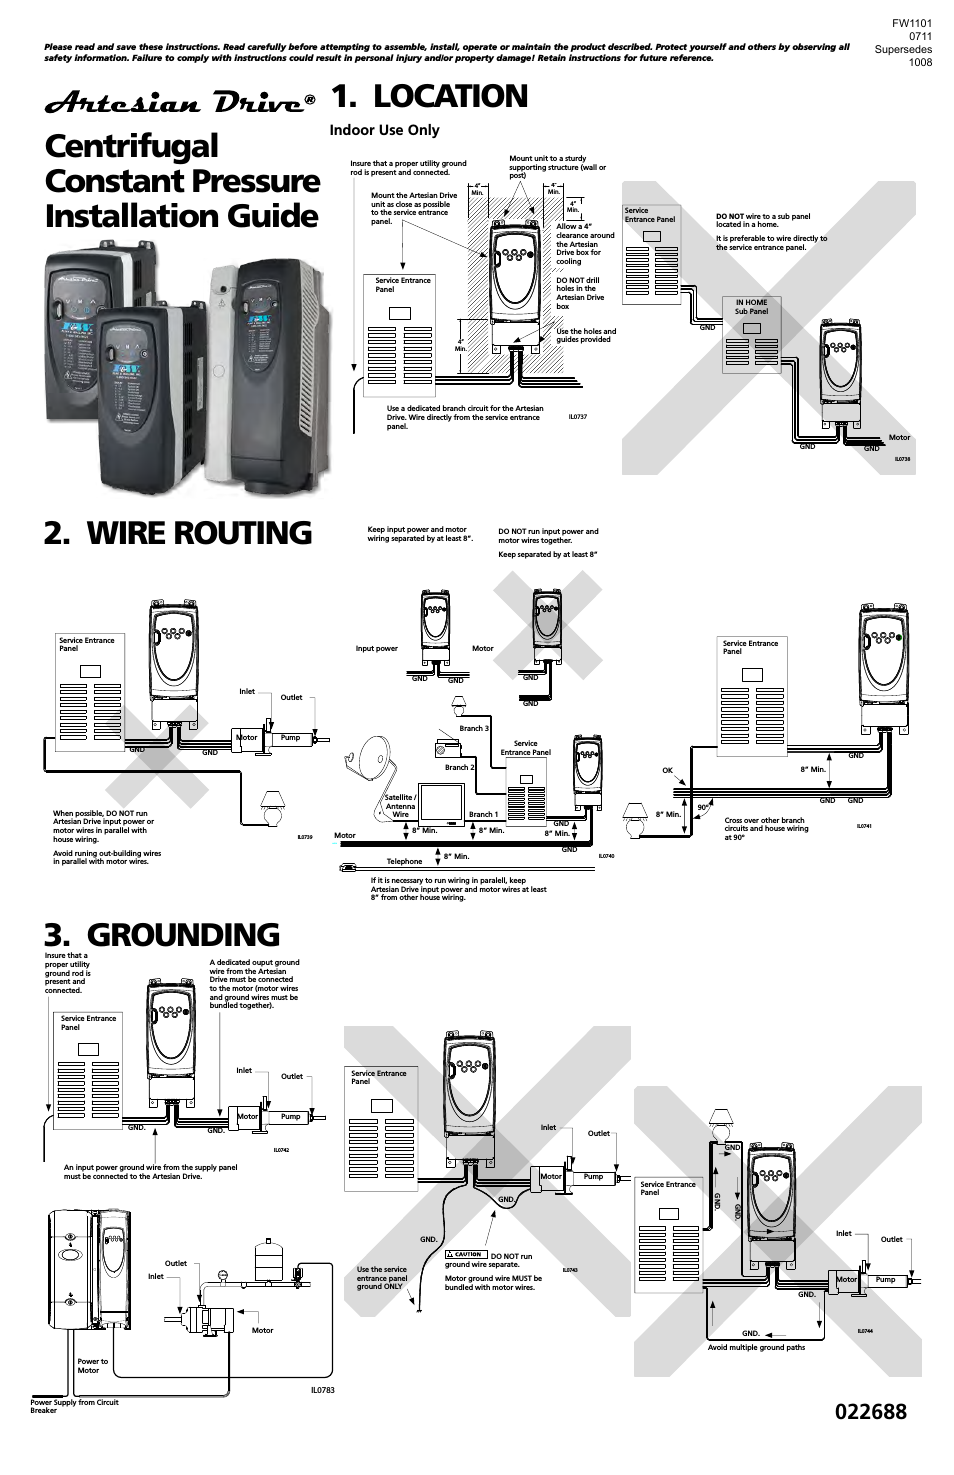 Constant Pressure Pumping Stations - Installation Guide